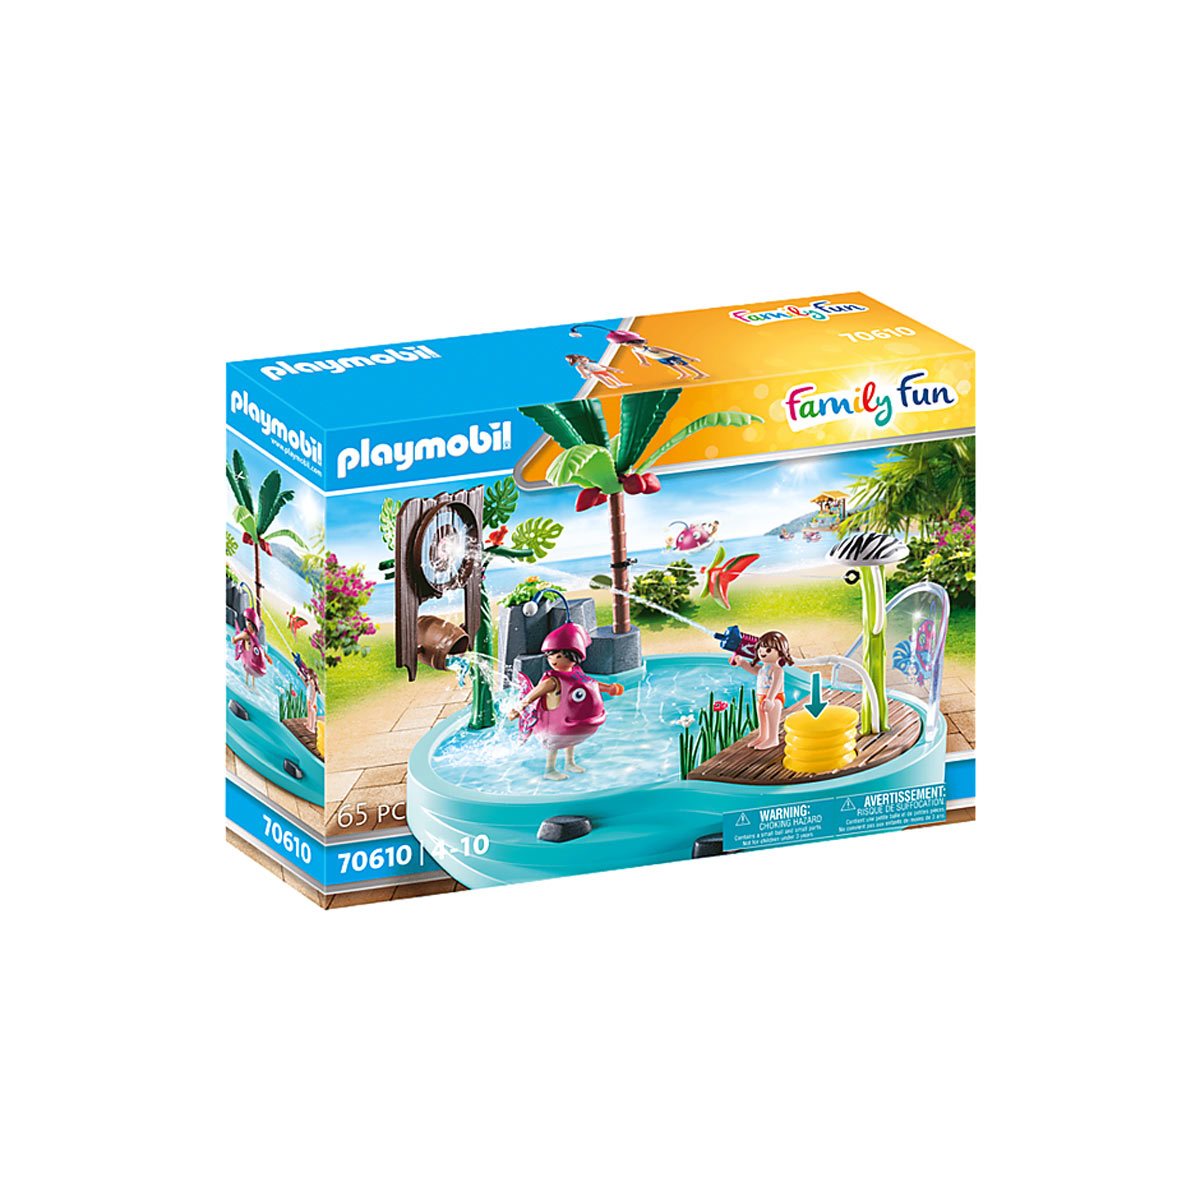 Playmobil new spares Fishes in Basket with handles 